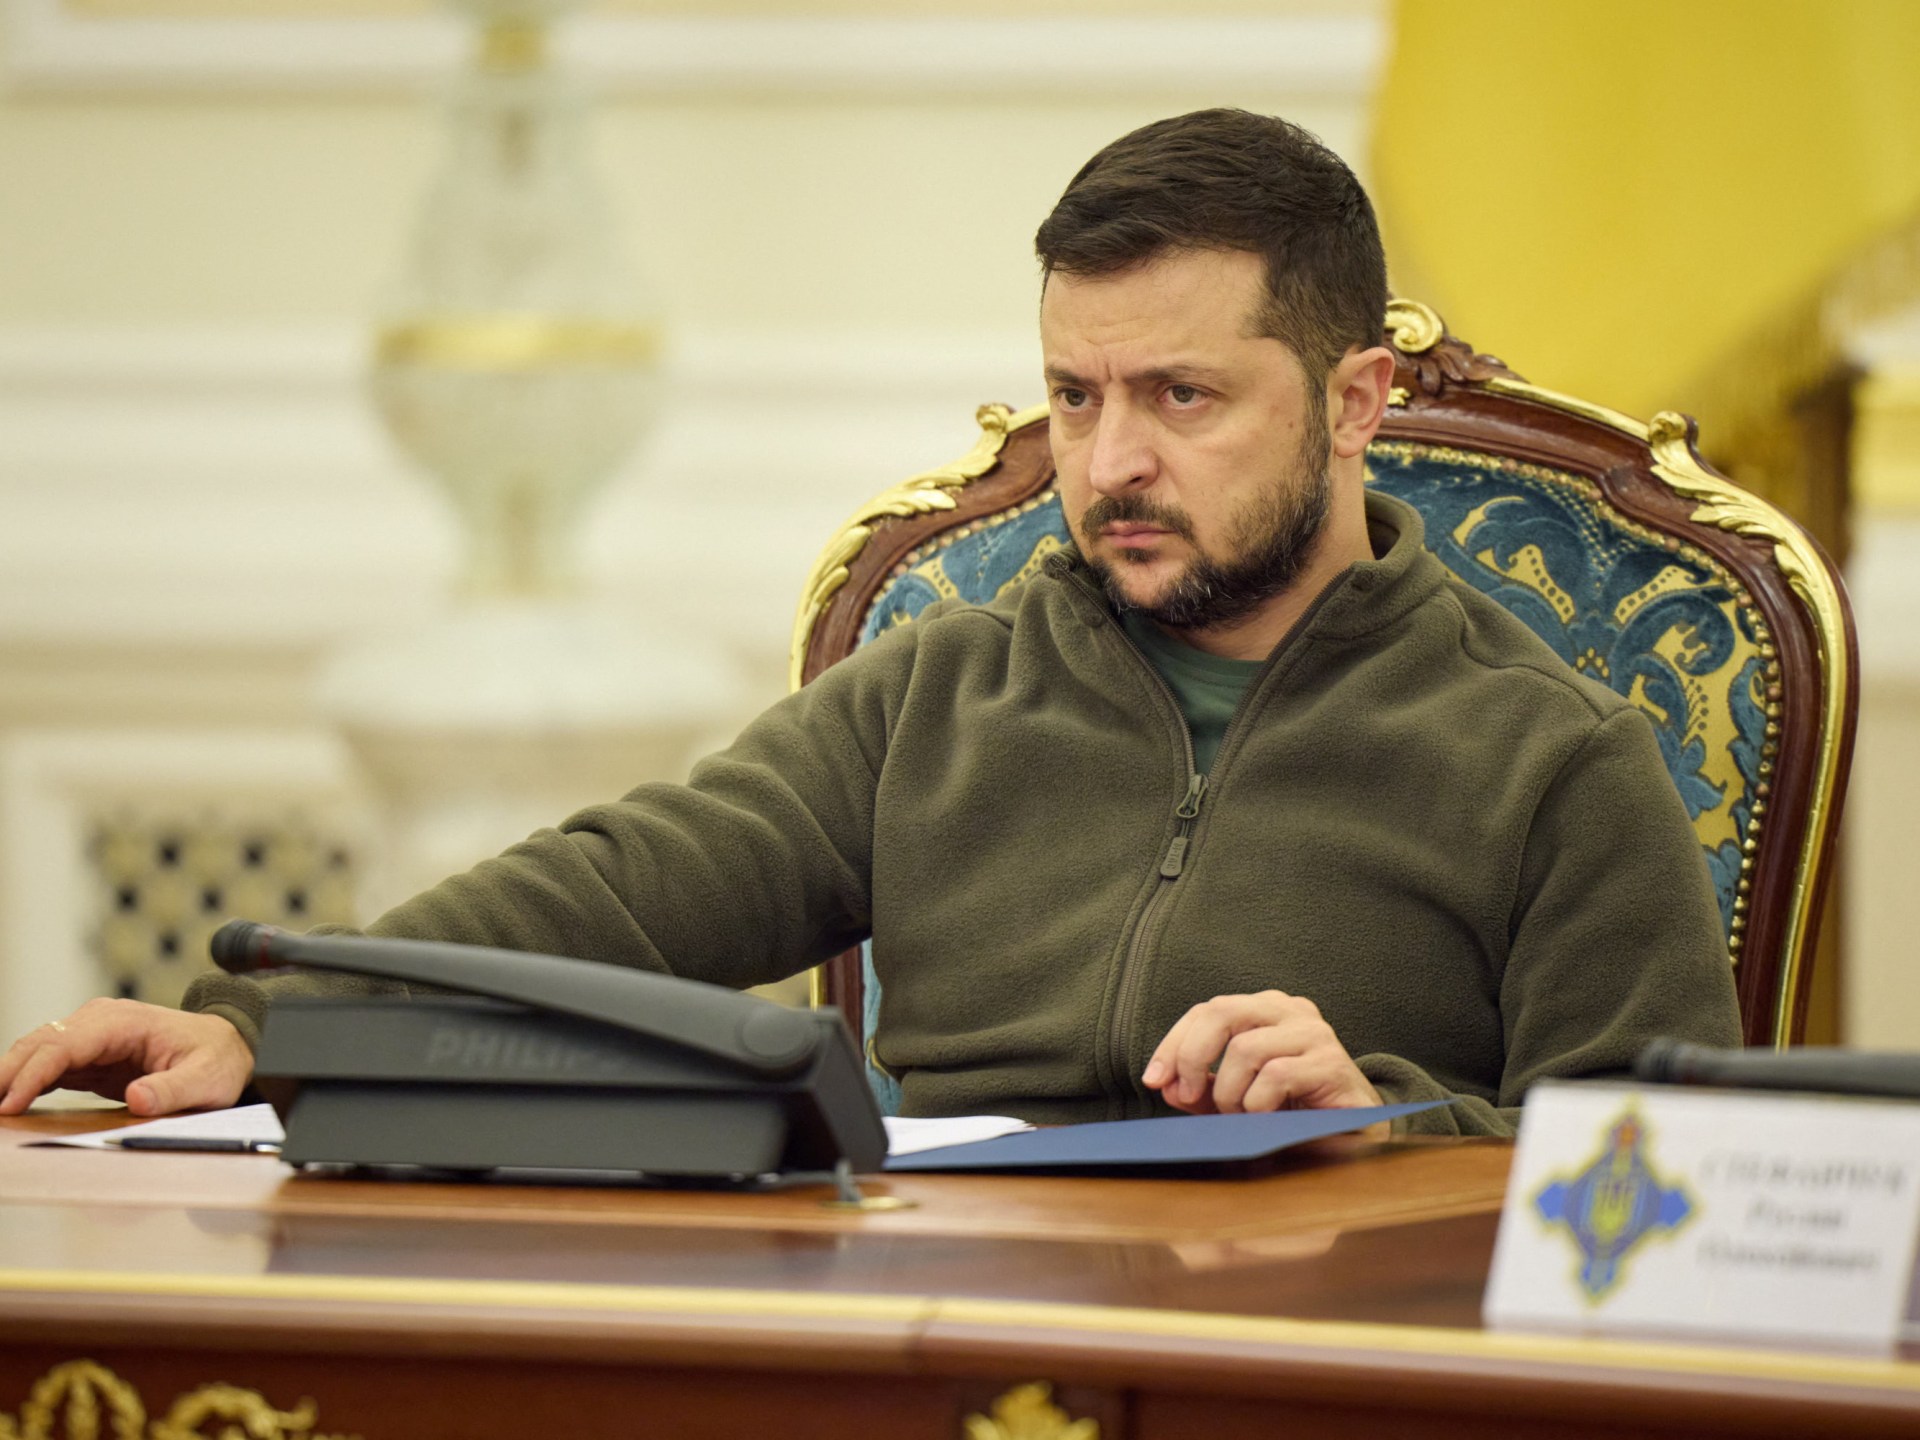 zelenskyy-blasts-israel-suggests-russia-iran-nuclear-collusion